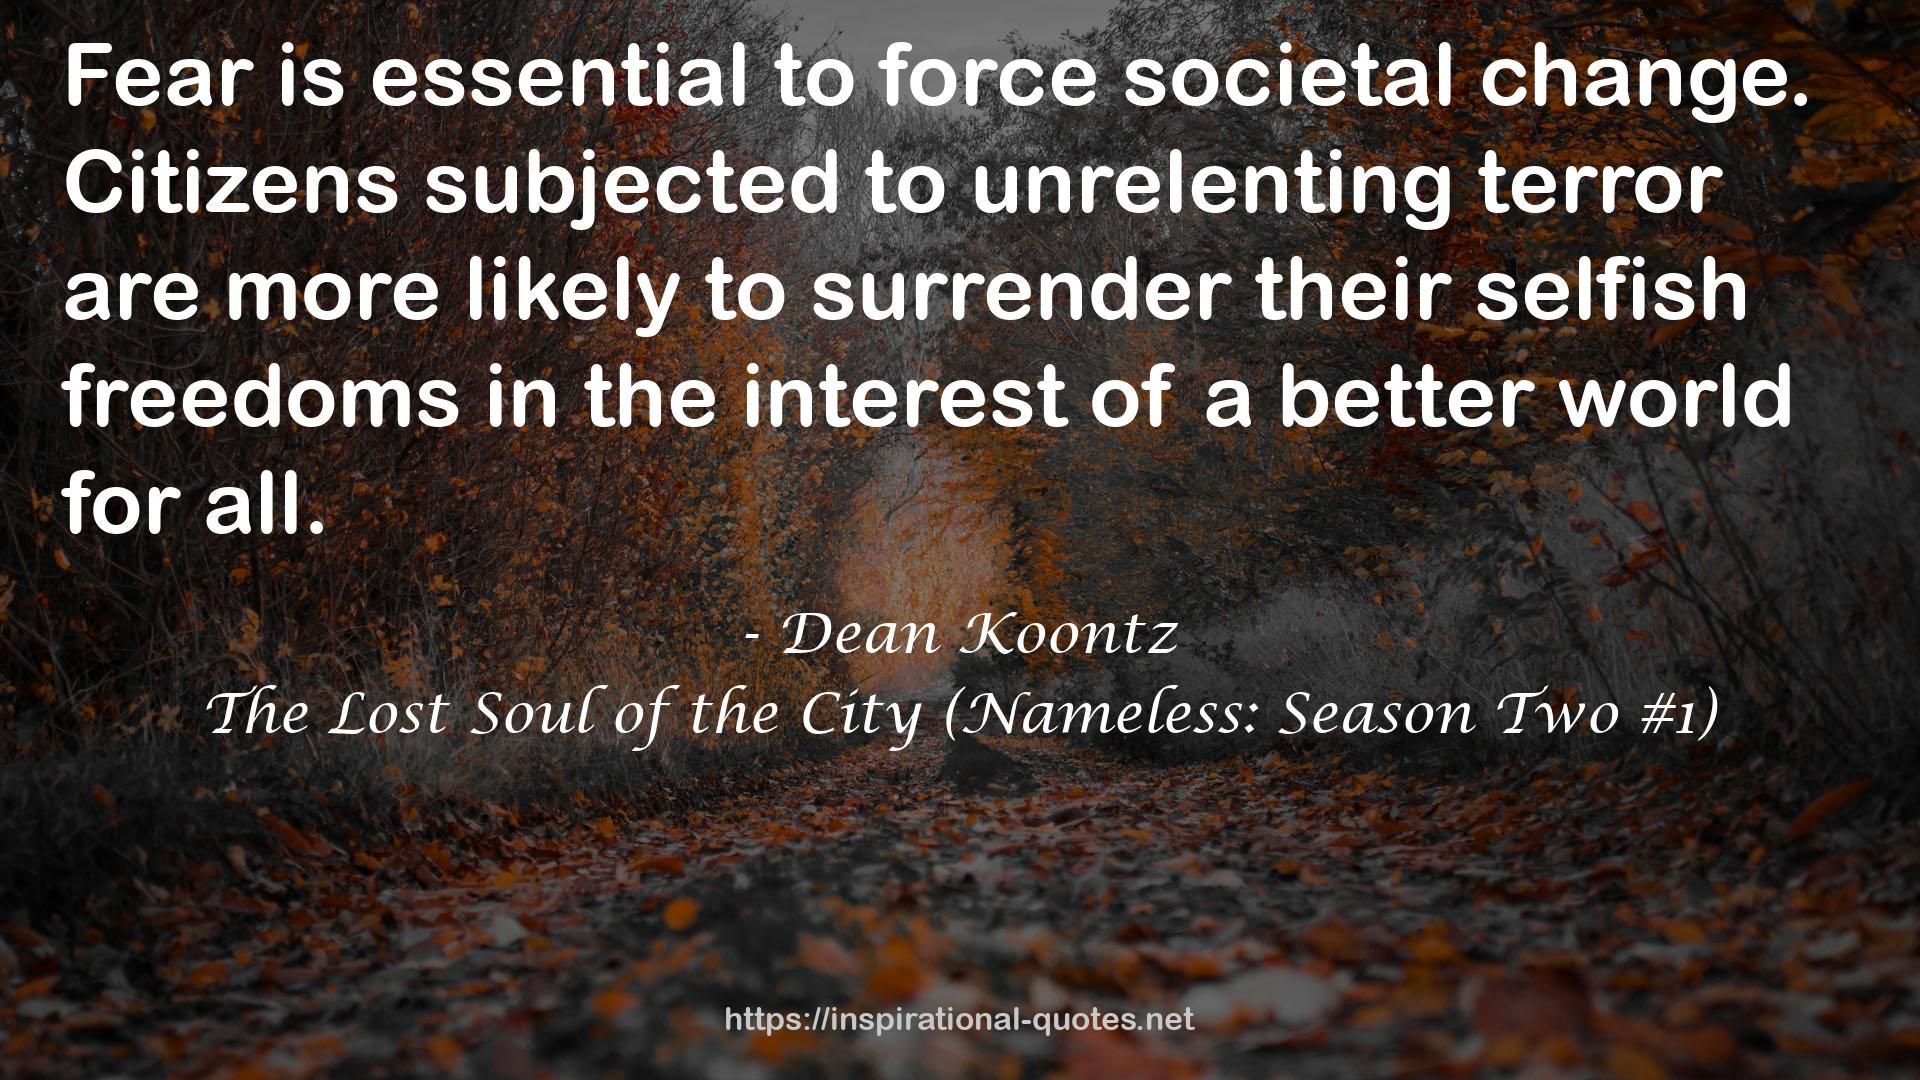 The Lost Soul of the City (Nameless: Season Two #1) QUOTES